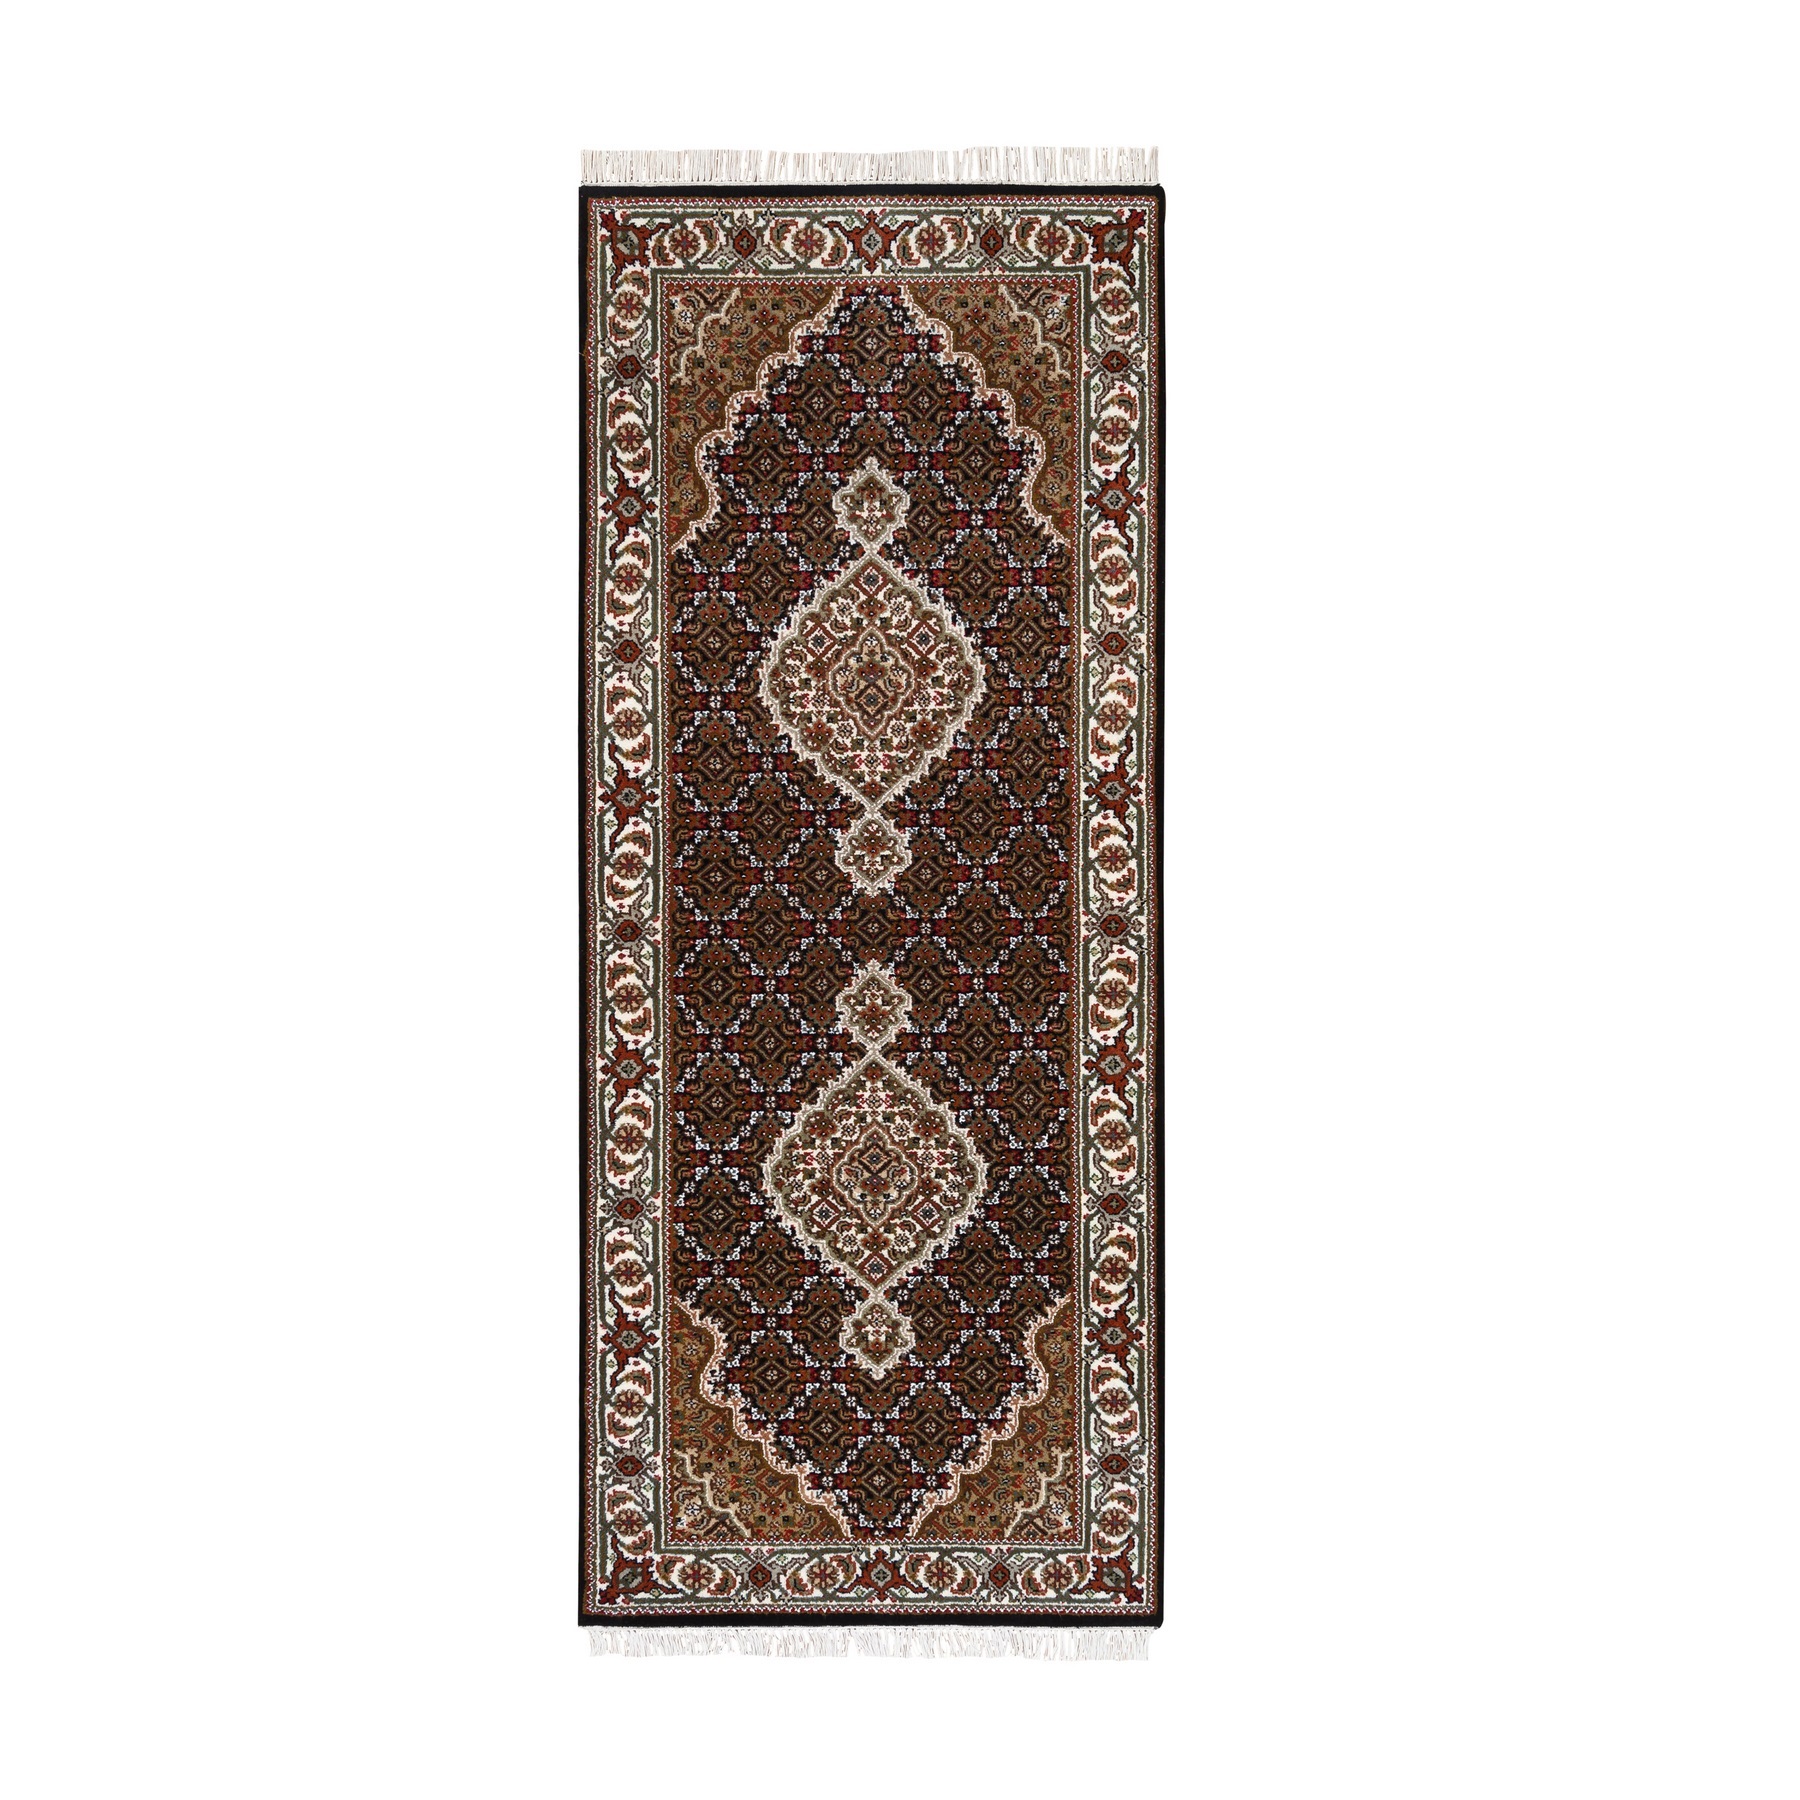 Pirniakan Collection Hand Knotted Black Rug No: 1124992